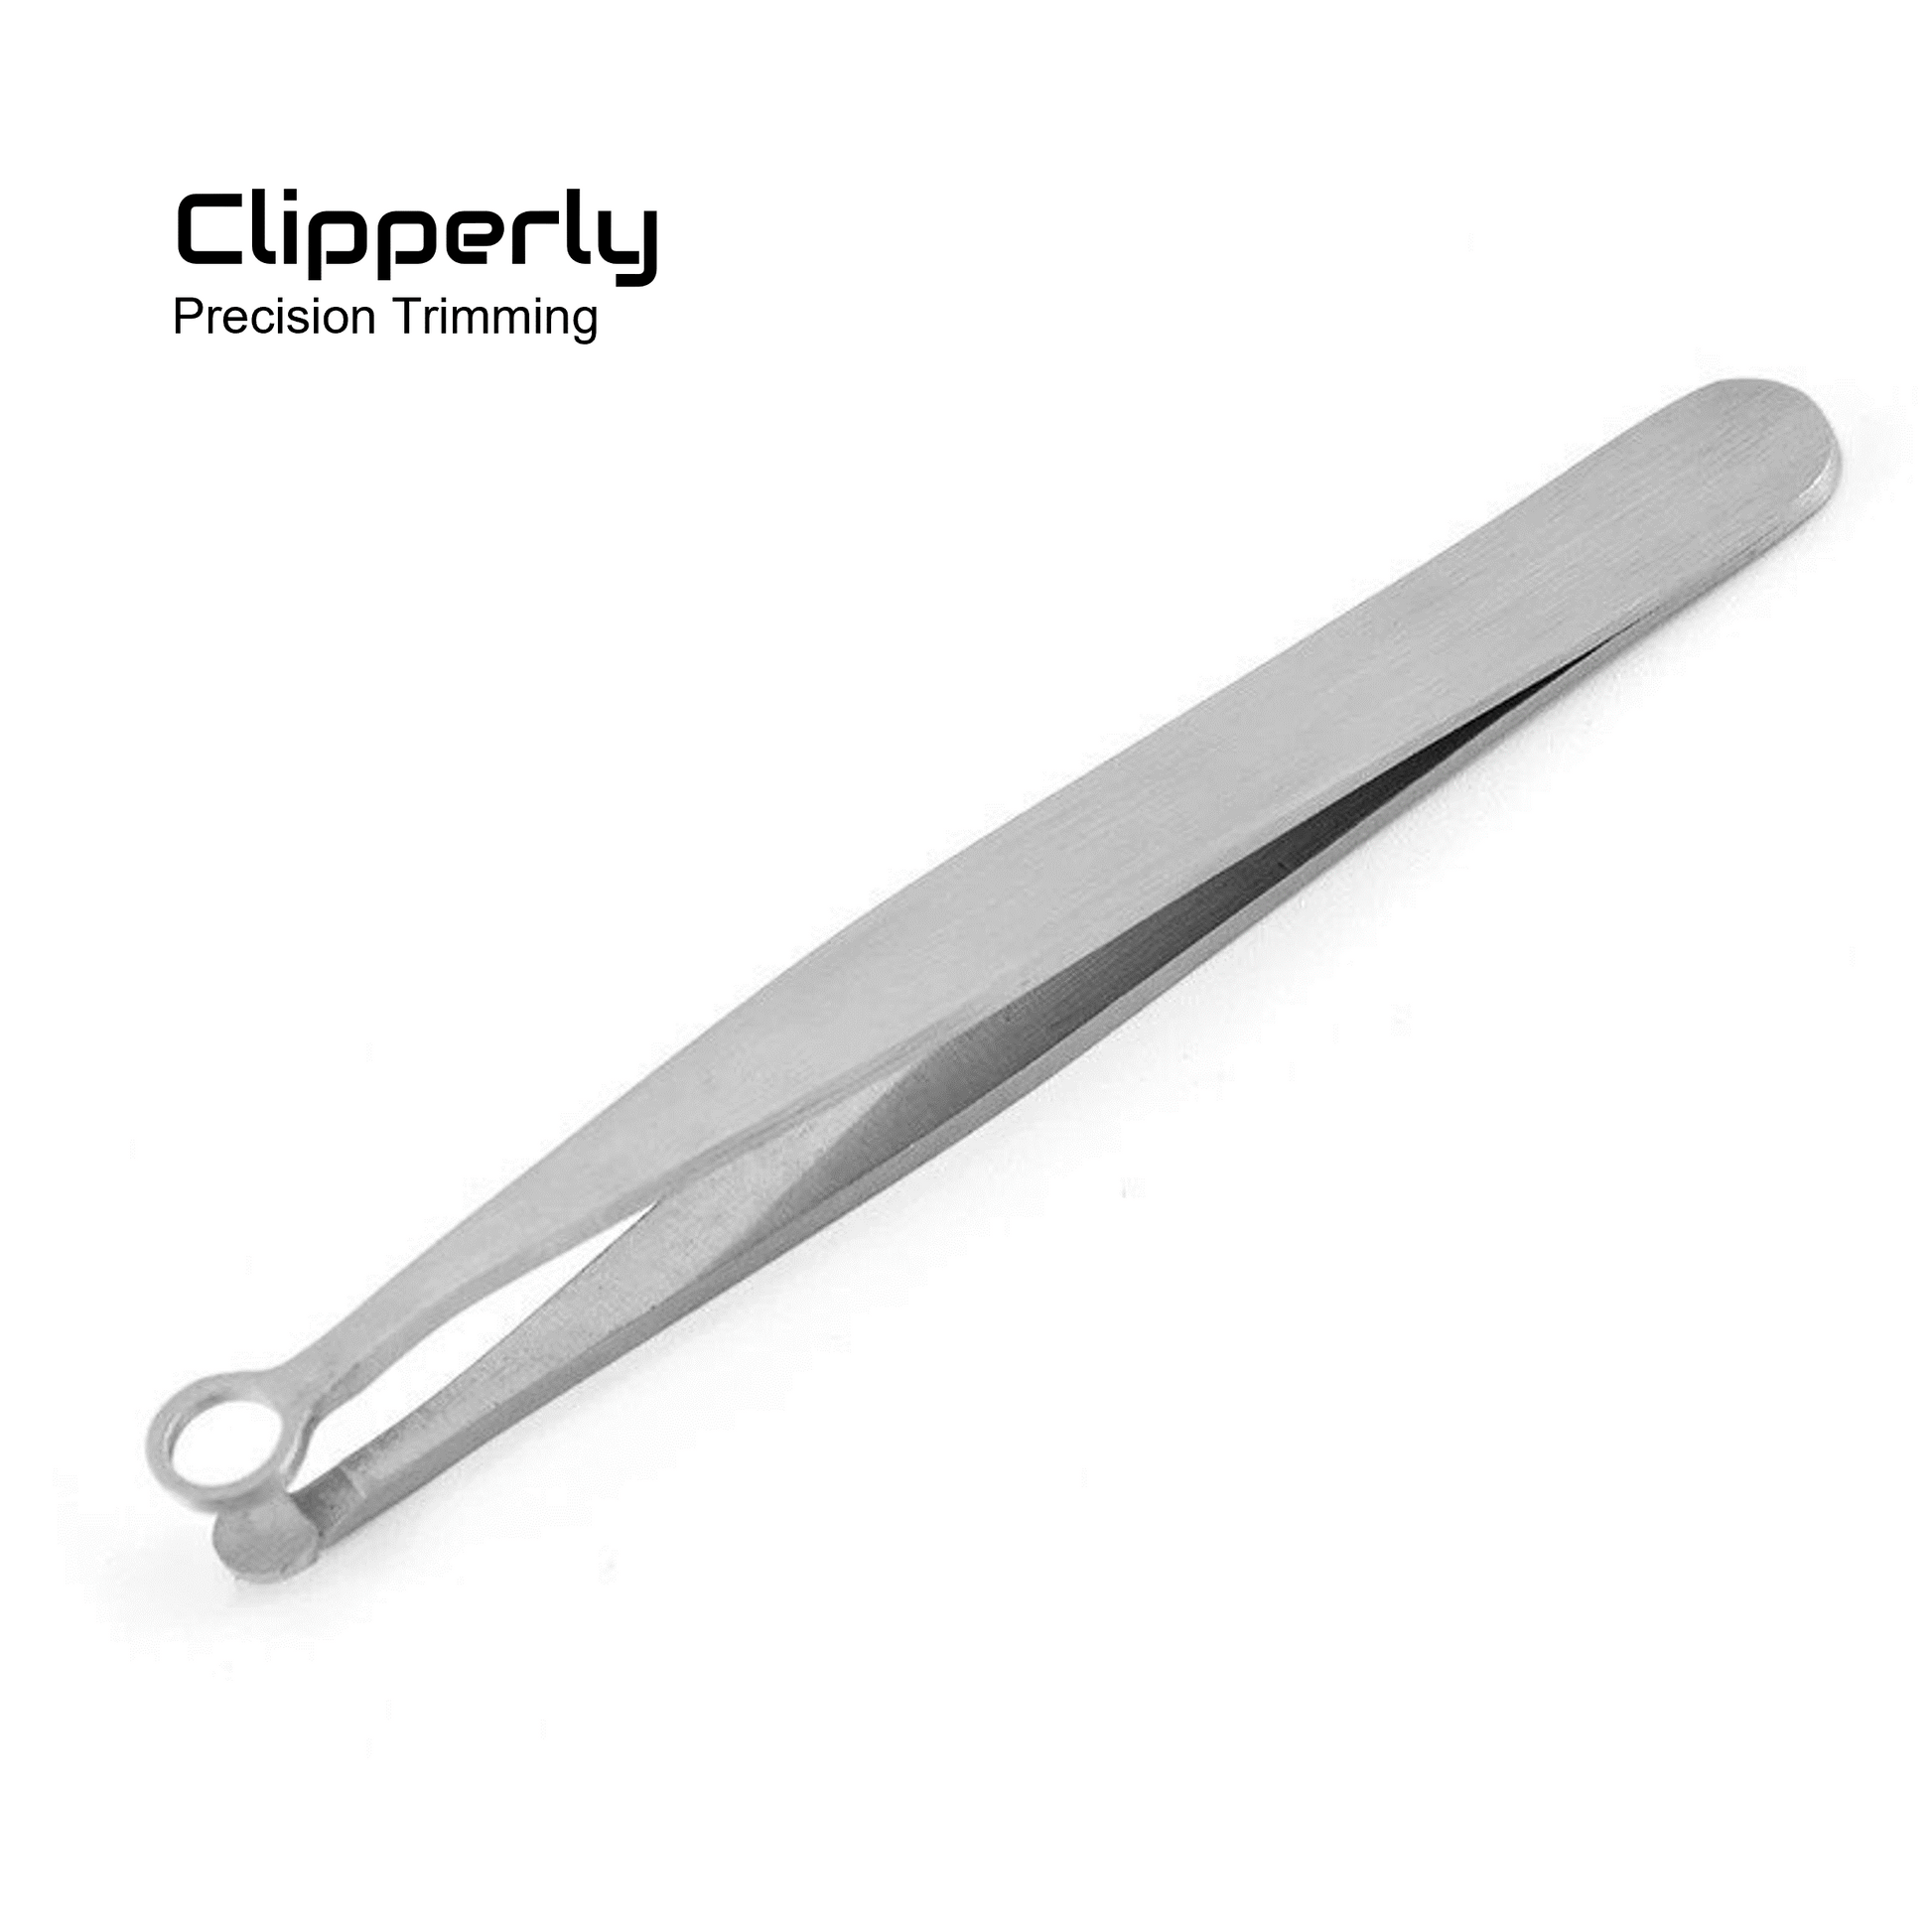 Nose and Eyebrow Hair Clippers for Precision Trimming MMi Products UK